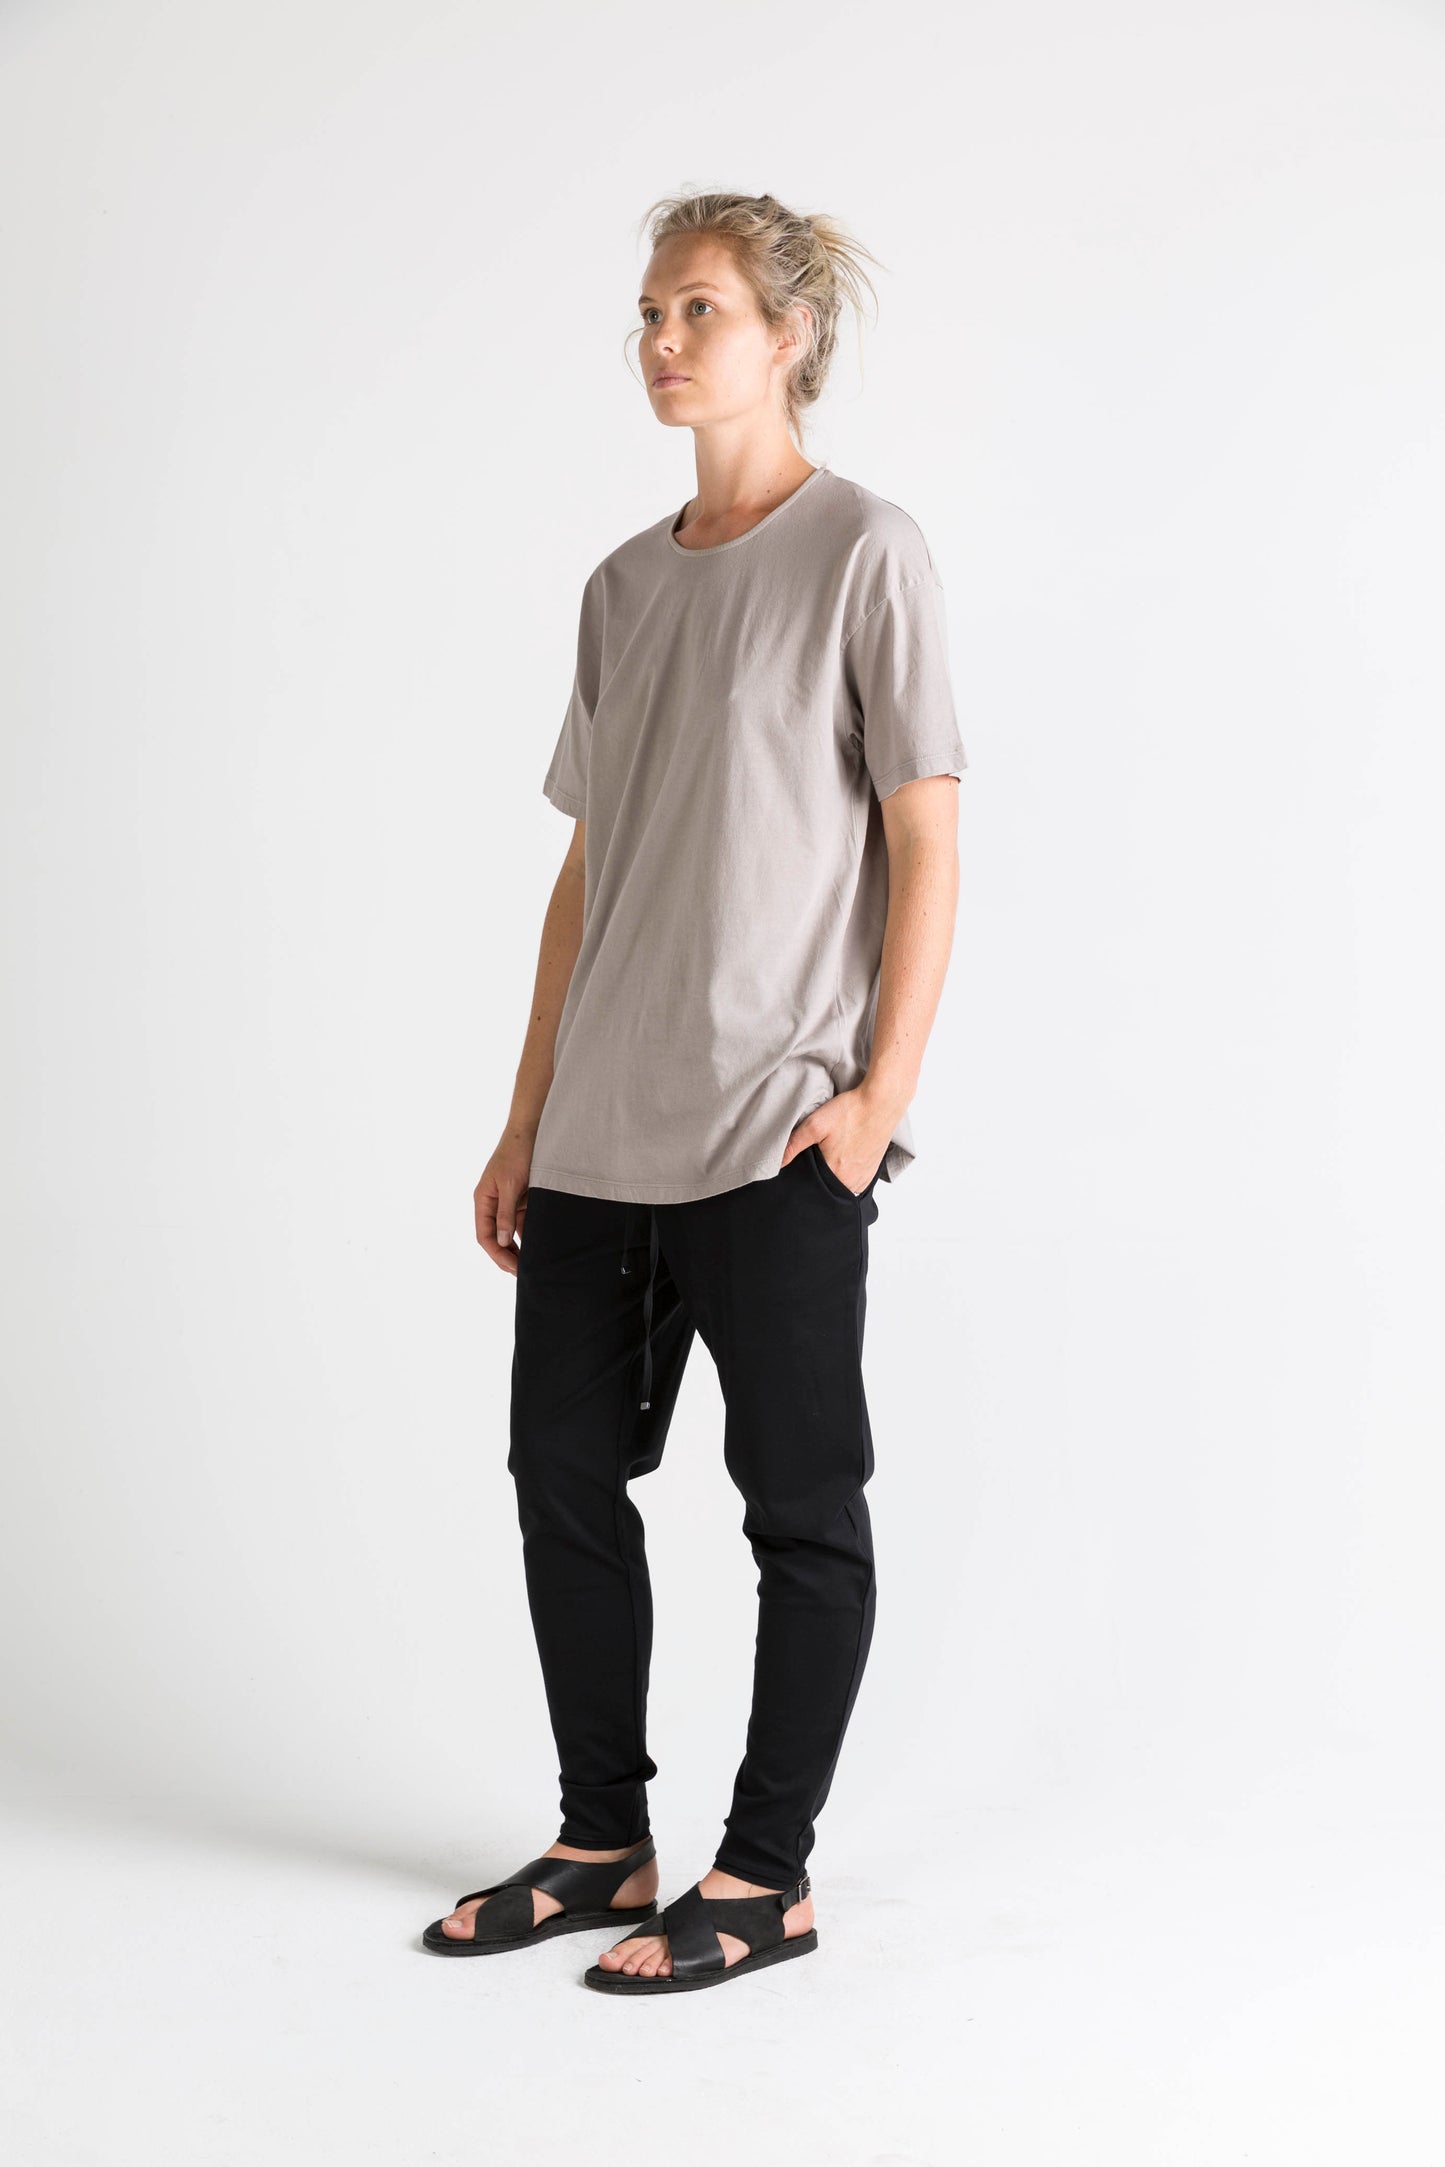 Ophelia and Ryder Short Sleeved T-Shirt